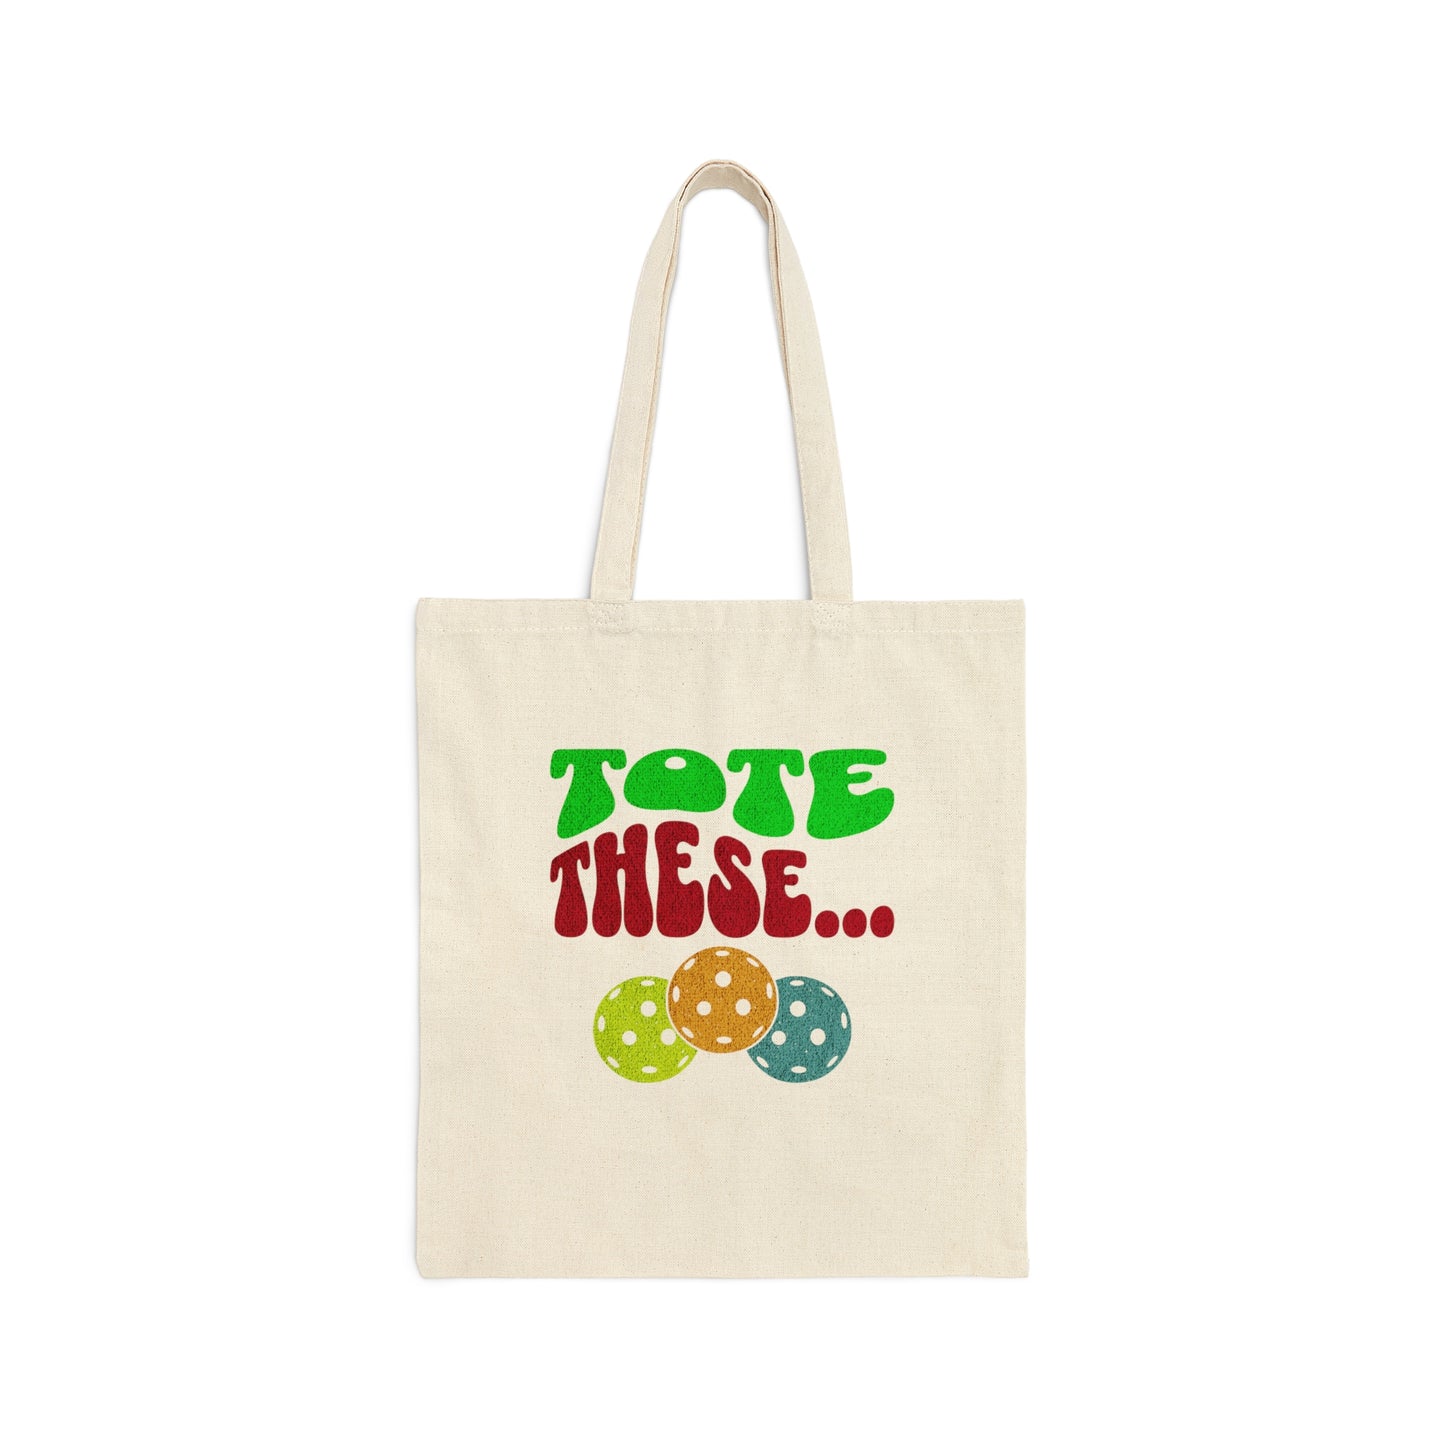 Tote These Balls - Pickleball Canvas Bag